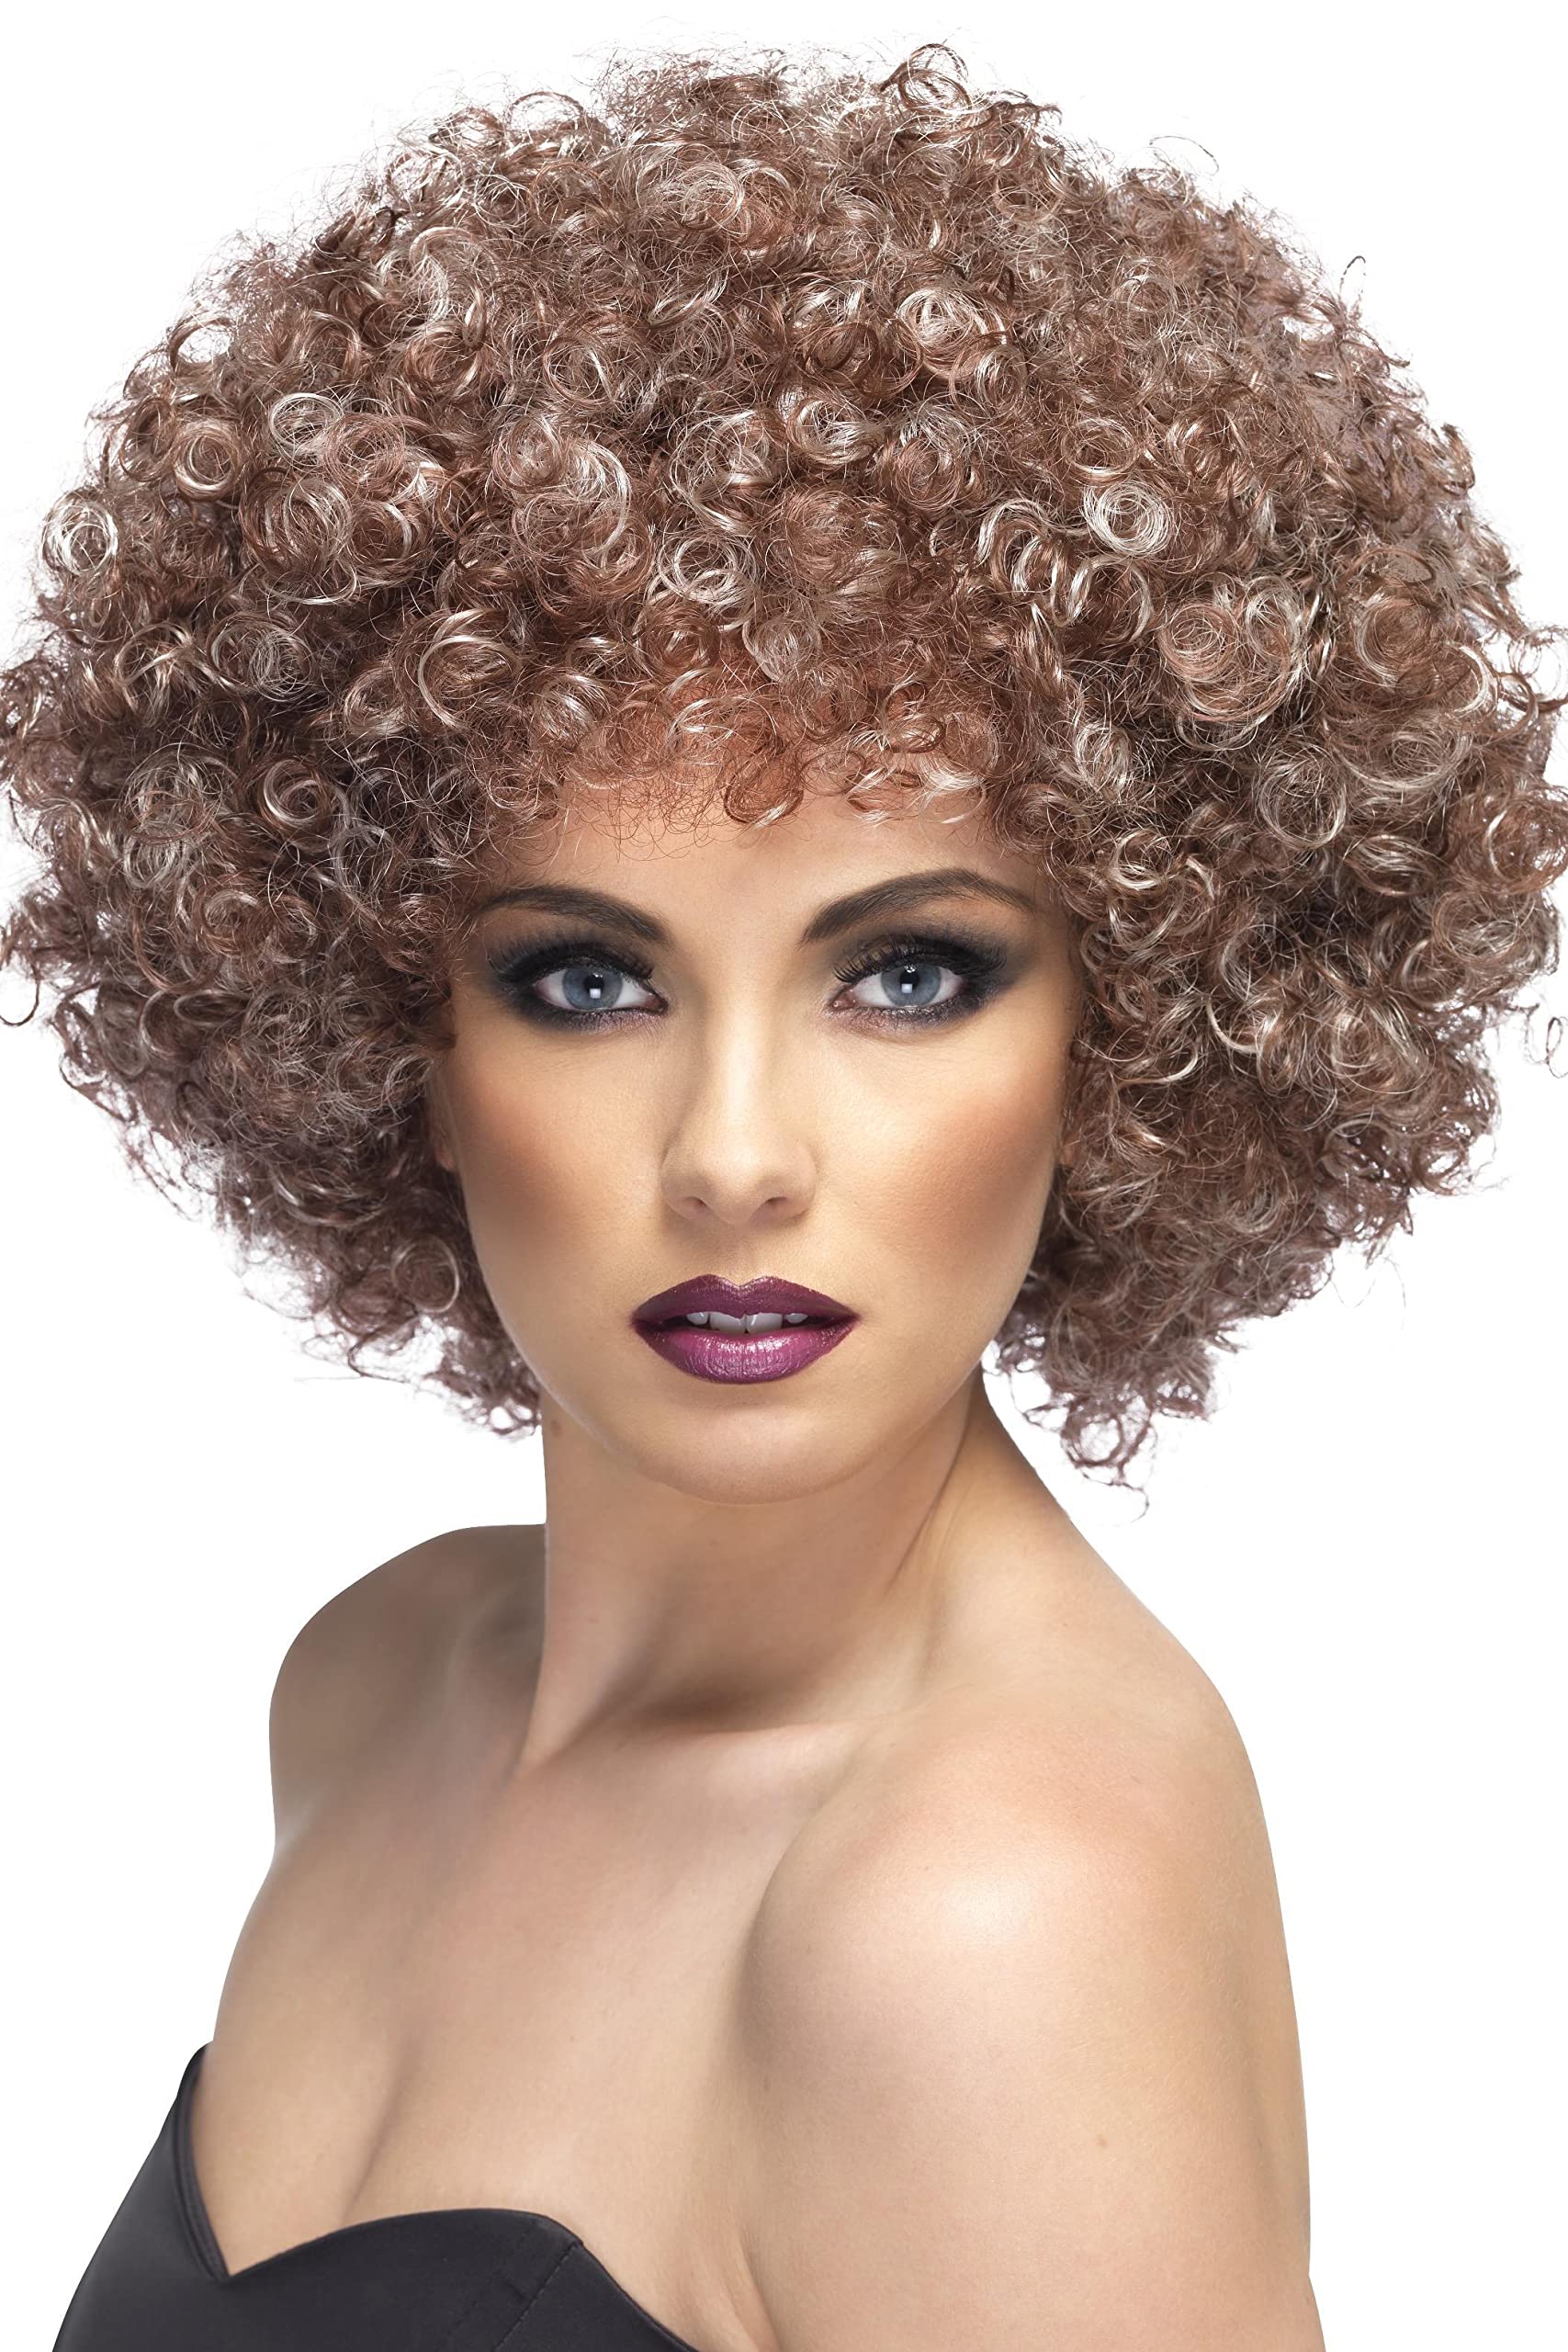 Smiffys Afro Wig Size: One Size